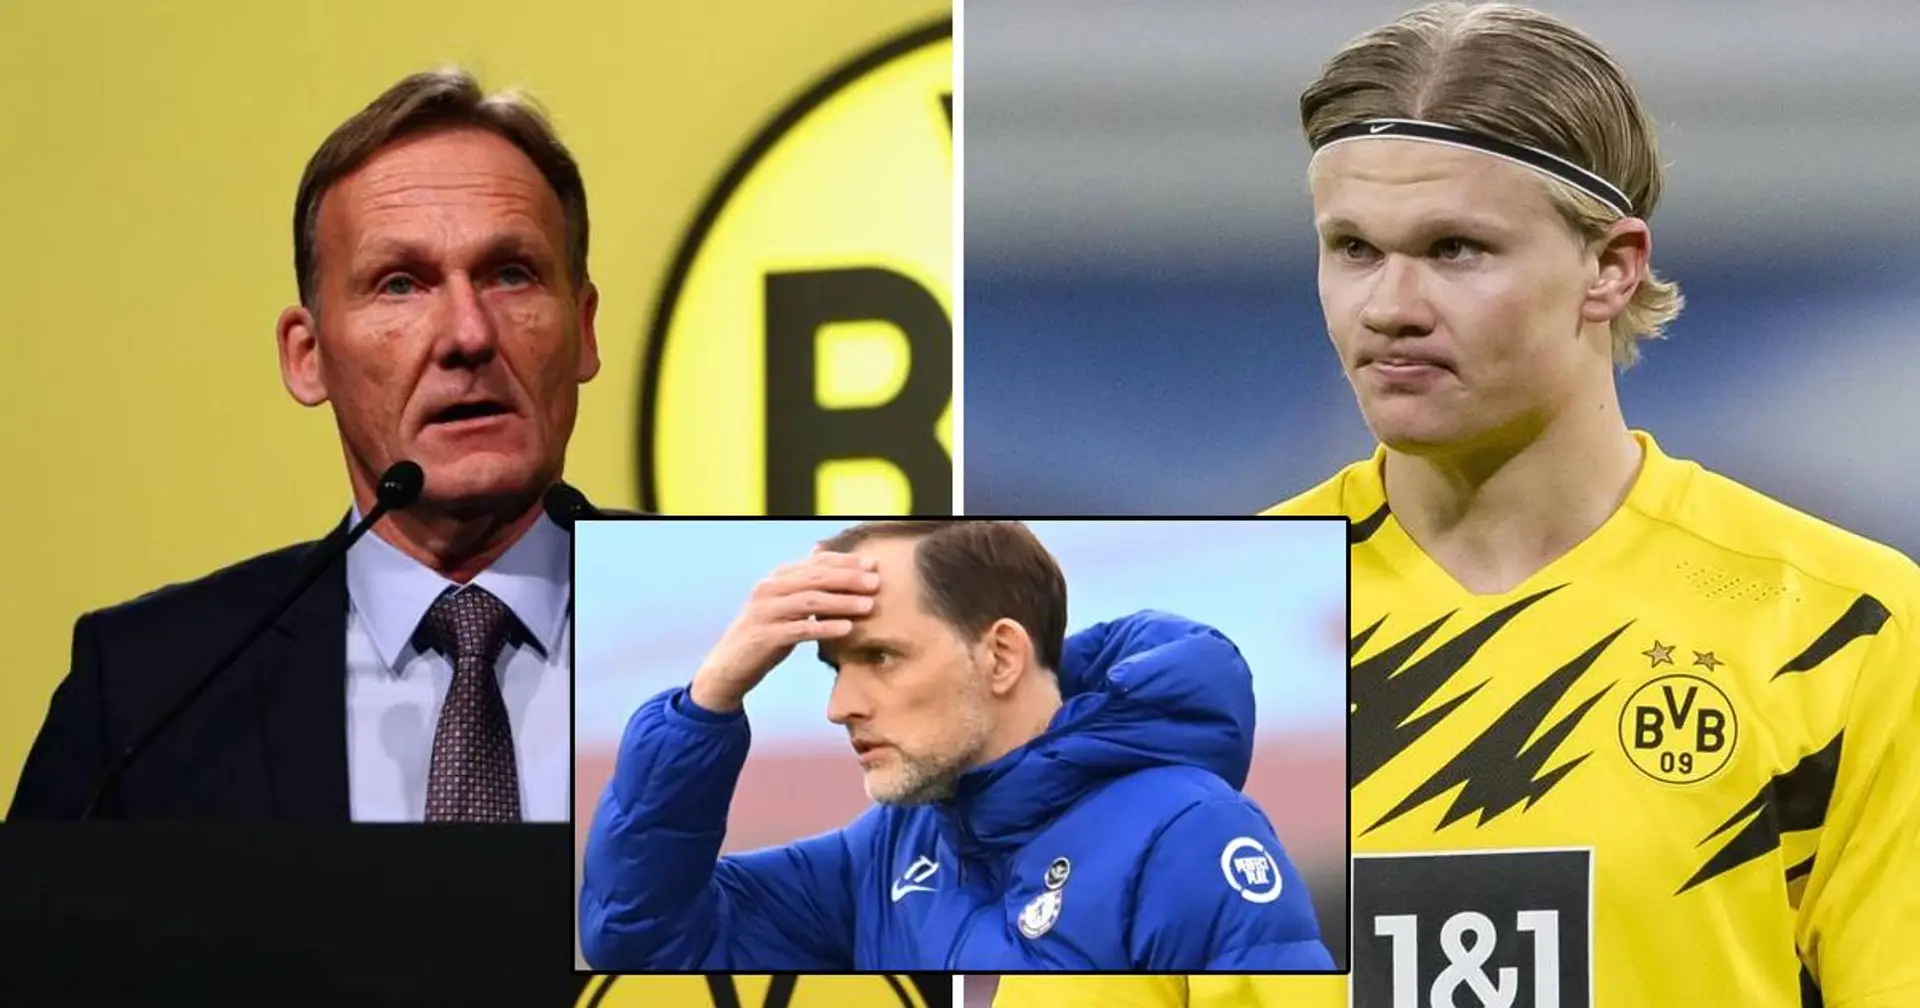 'No one seems to listen': Dortmund CEO furious over latest Haaland rumours